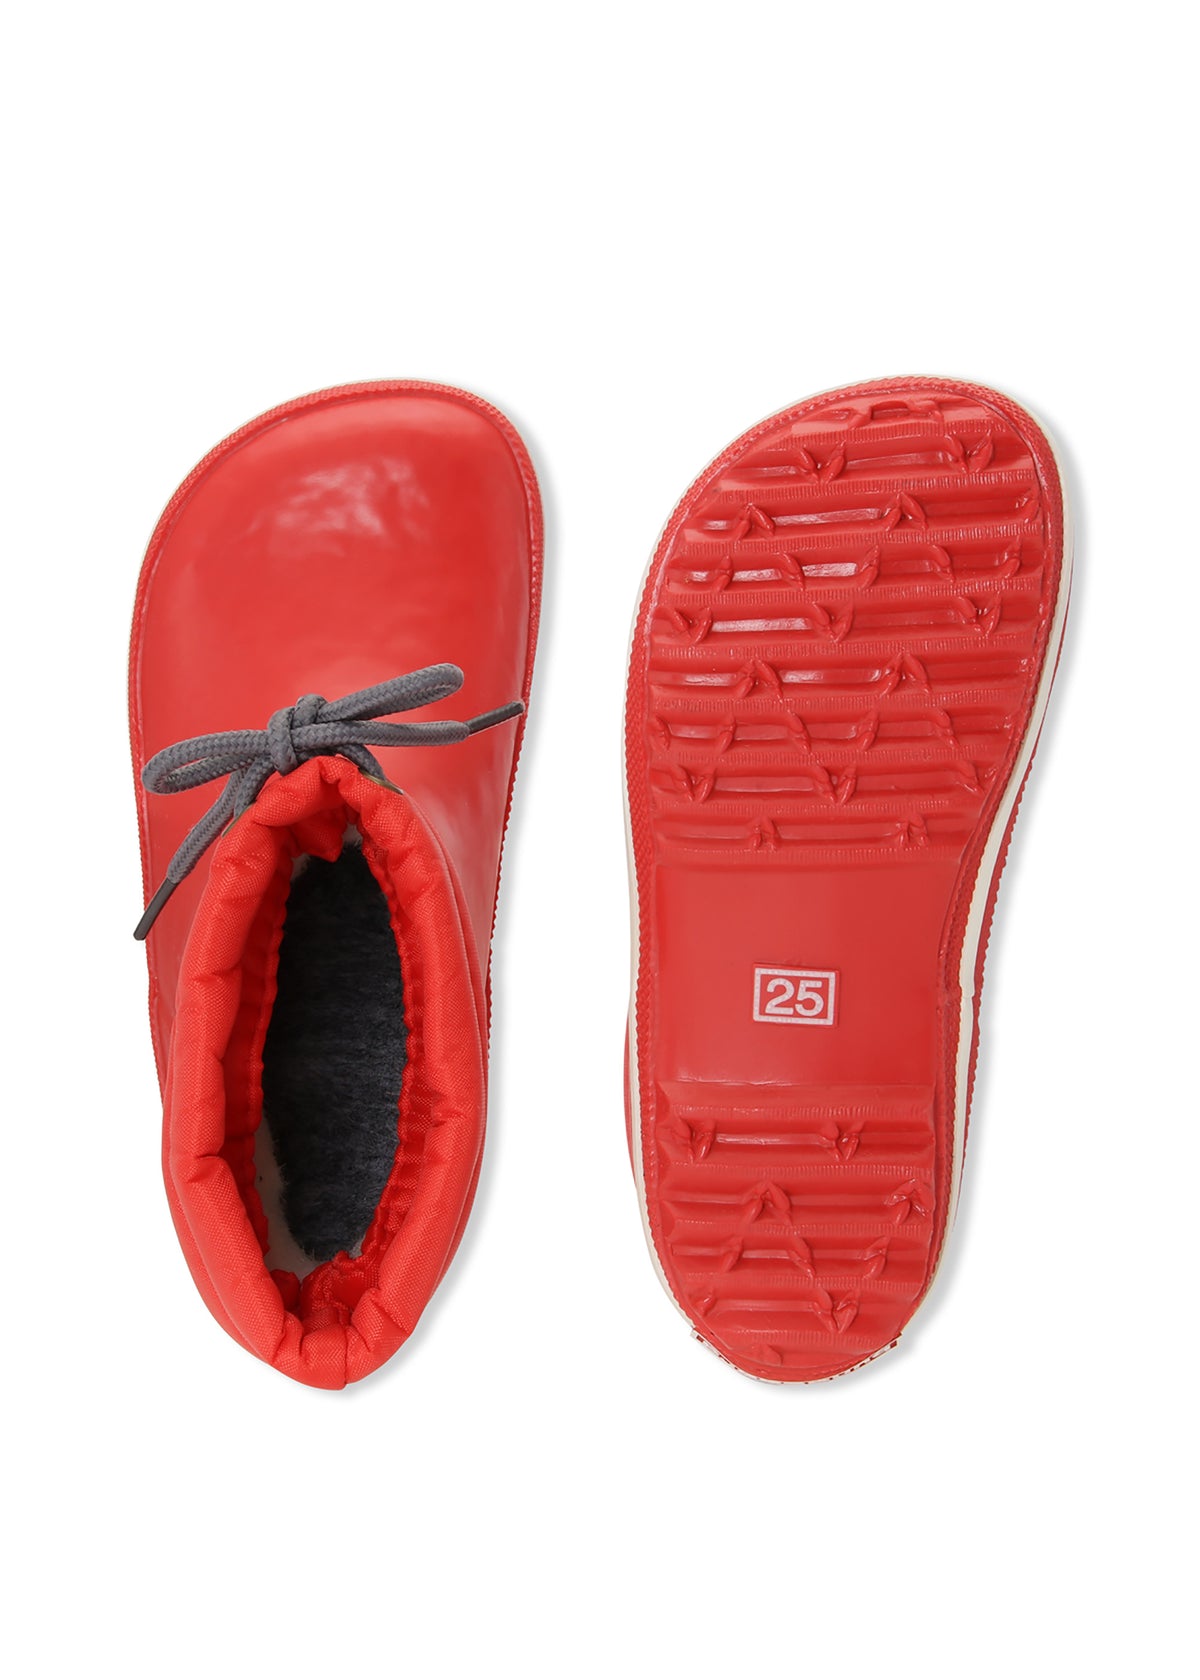 Rubber boots with a warm lining - red, short shaft, drawstrings, Cirro Low Warm